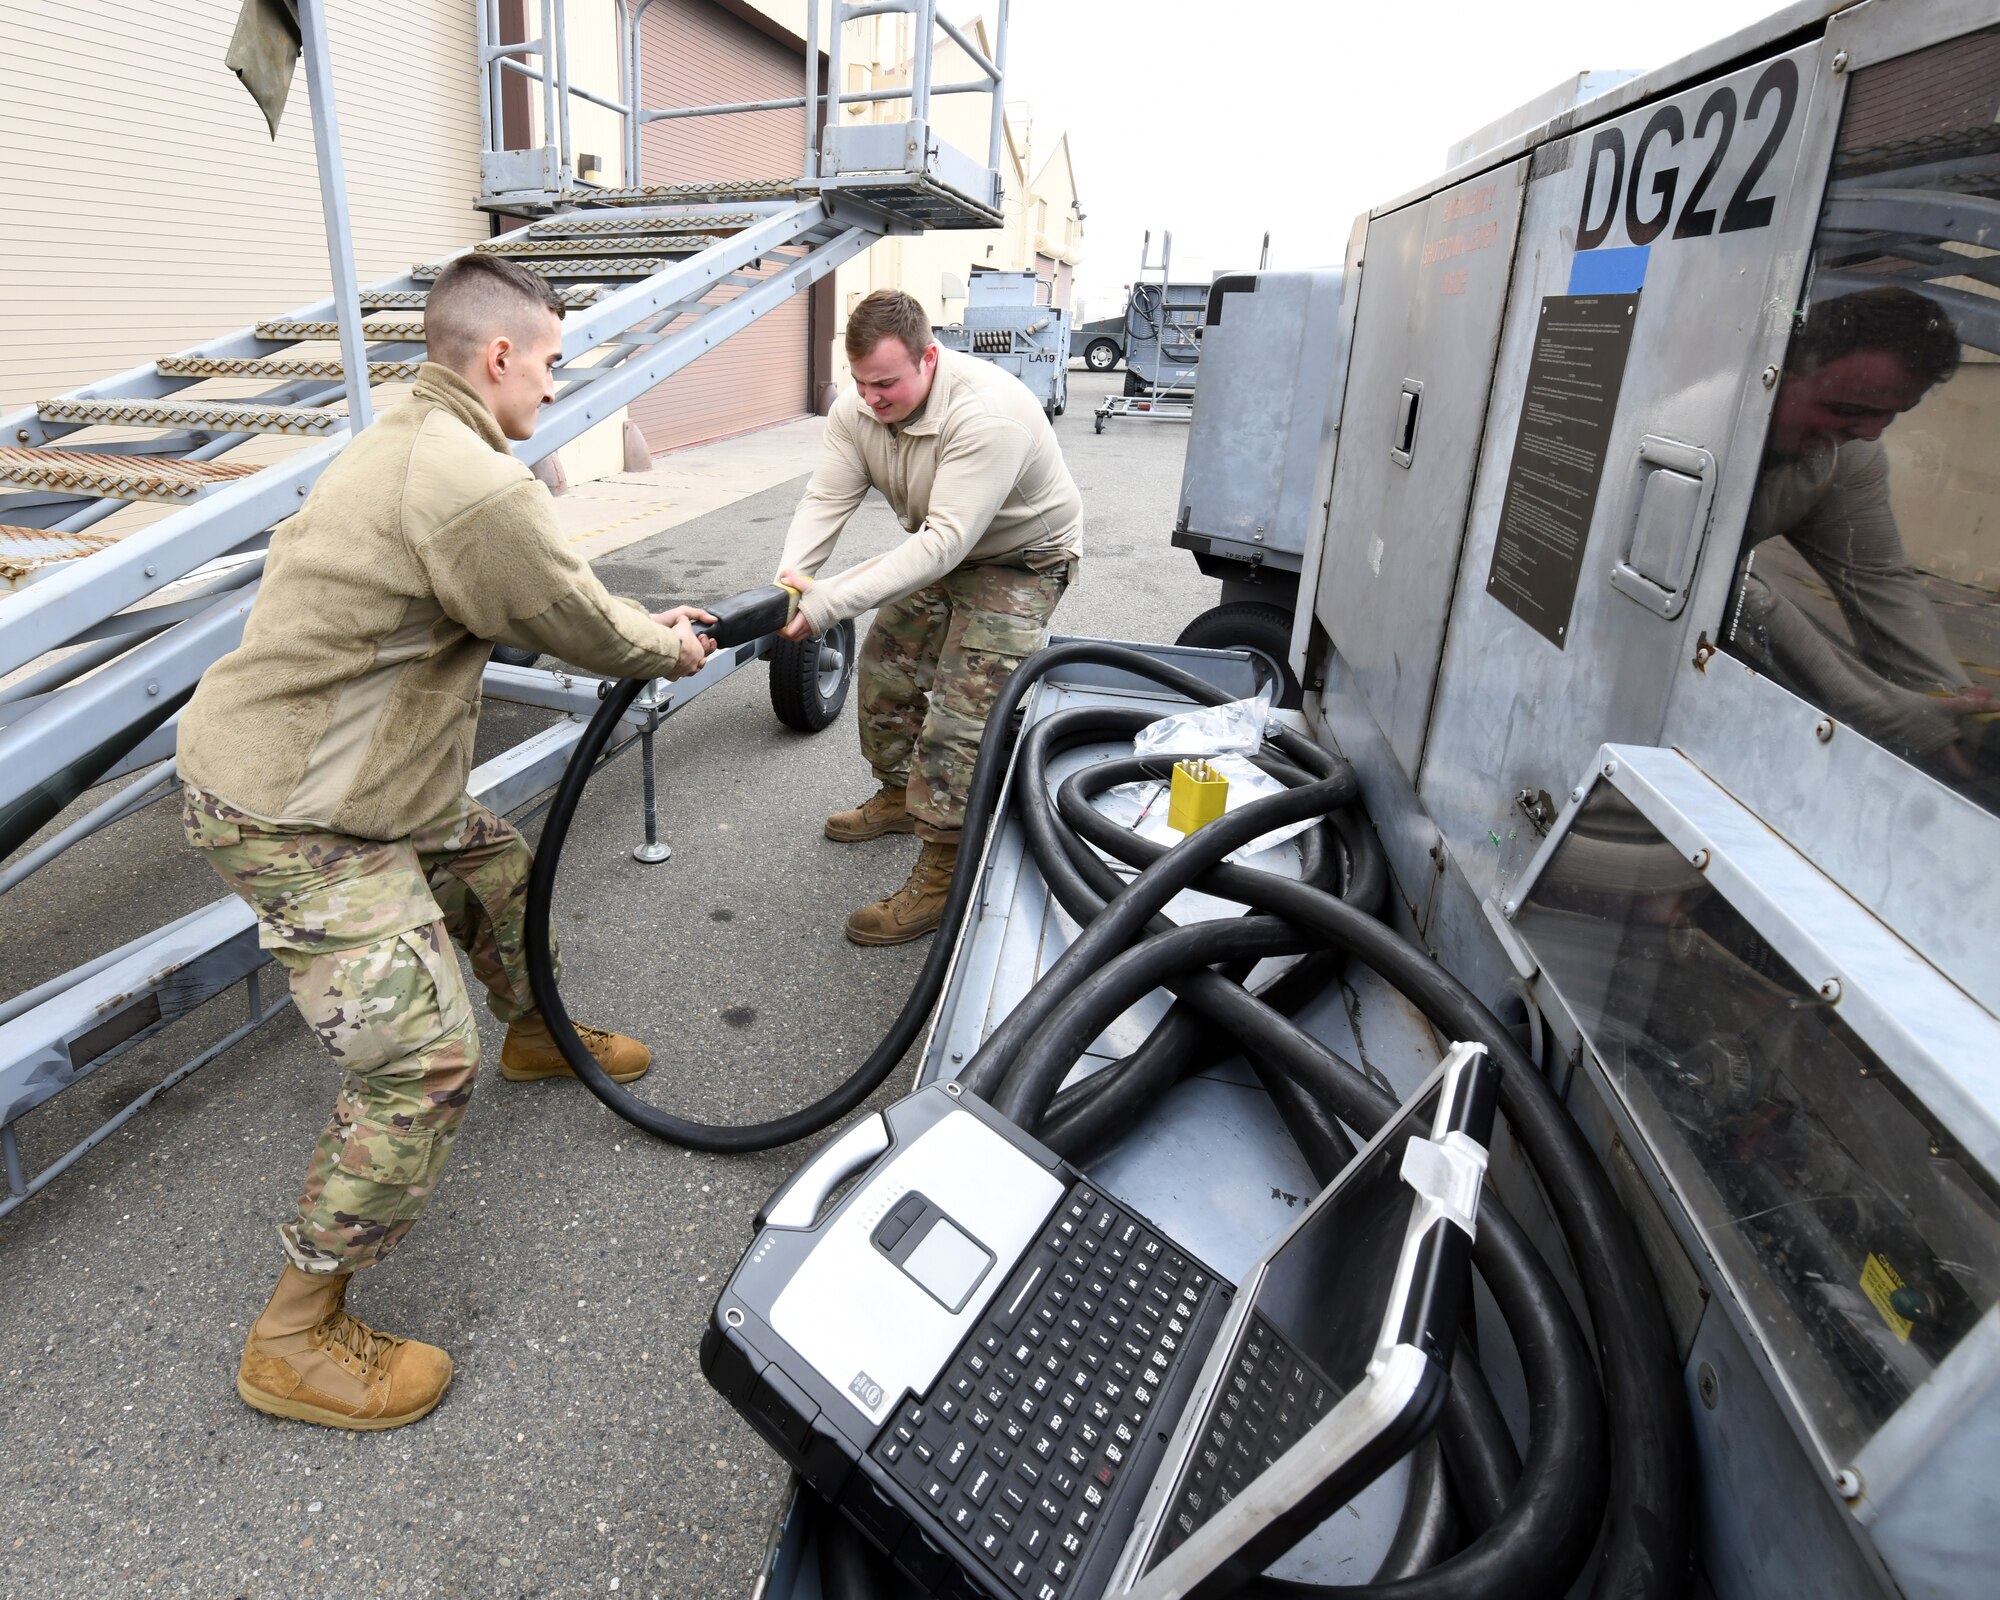 Senior Airman Alec Bowman, 9th Maintenance Squadron aerospace ground equipment apprentice, and Staff Sgt. Hunter Layton 9th MXS AGE journeyman, remove an AC cable head, Jan. 7, 2020 at Beale Air Force Base California. AGE works with equipment ranging from air conditioning units to equipment that supplies electricity, hydraulic pressure, and air pressure to aircraft. (U.S. Air Force photo by Airman 1st Class Luis A. Ruiz-Vazquez)